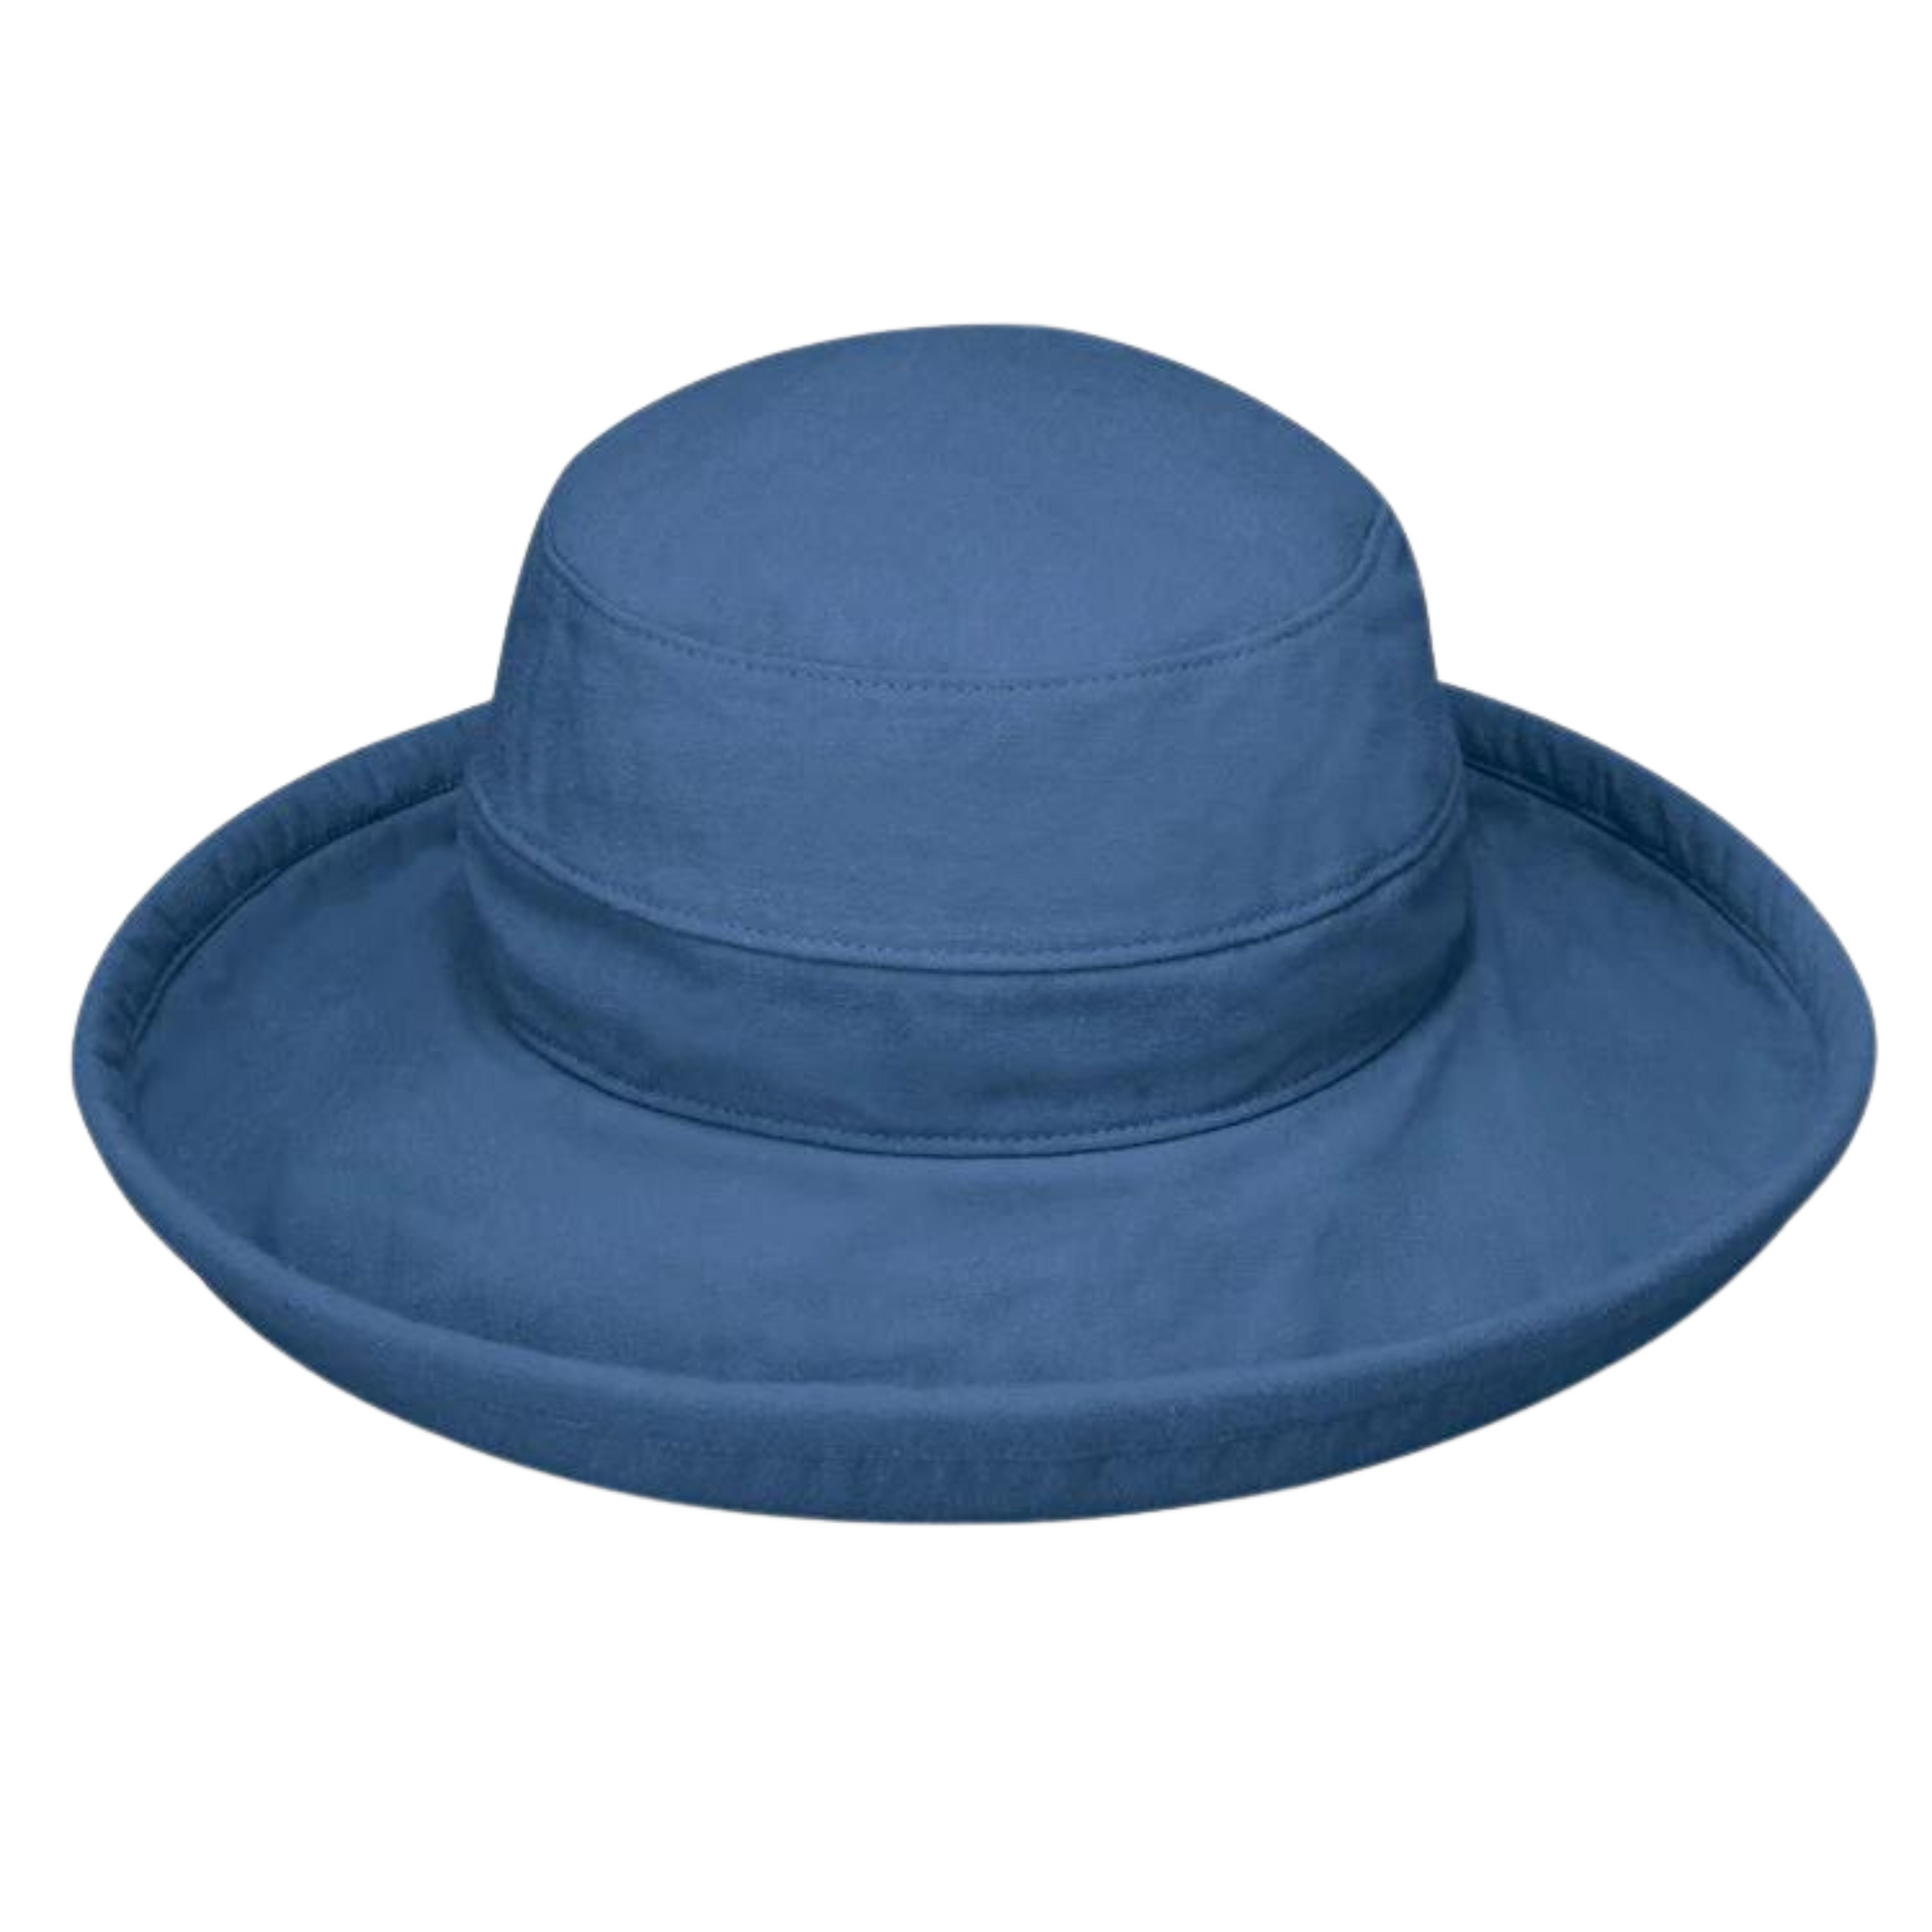 Blue hat pictured from the front featuring a turned up brim and uniform coloured band in the centre that is emphasized with stitch detail.